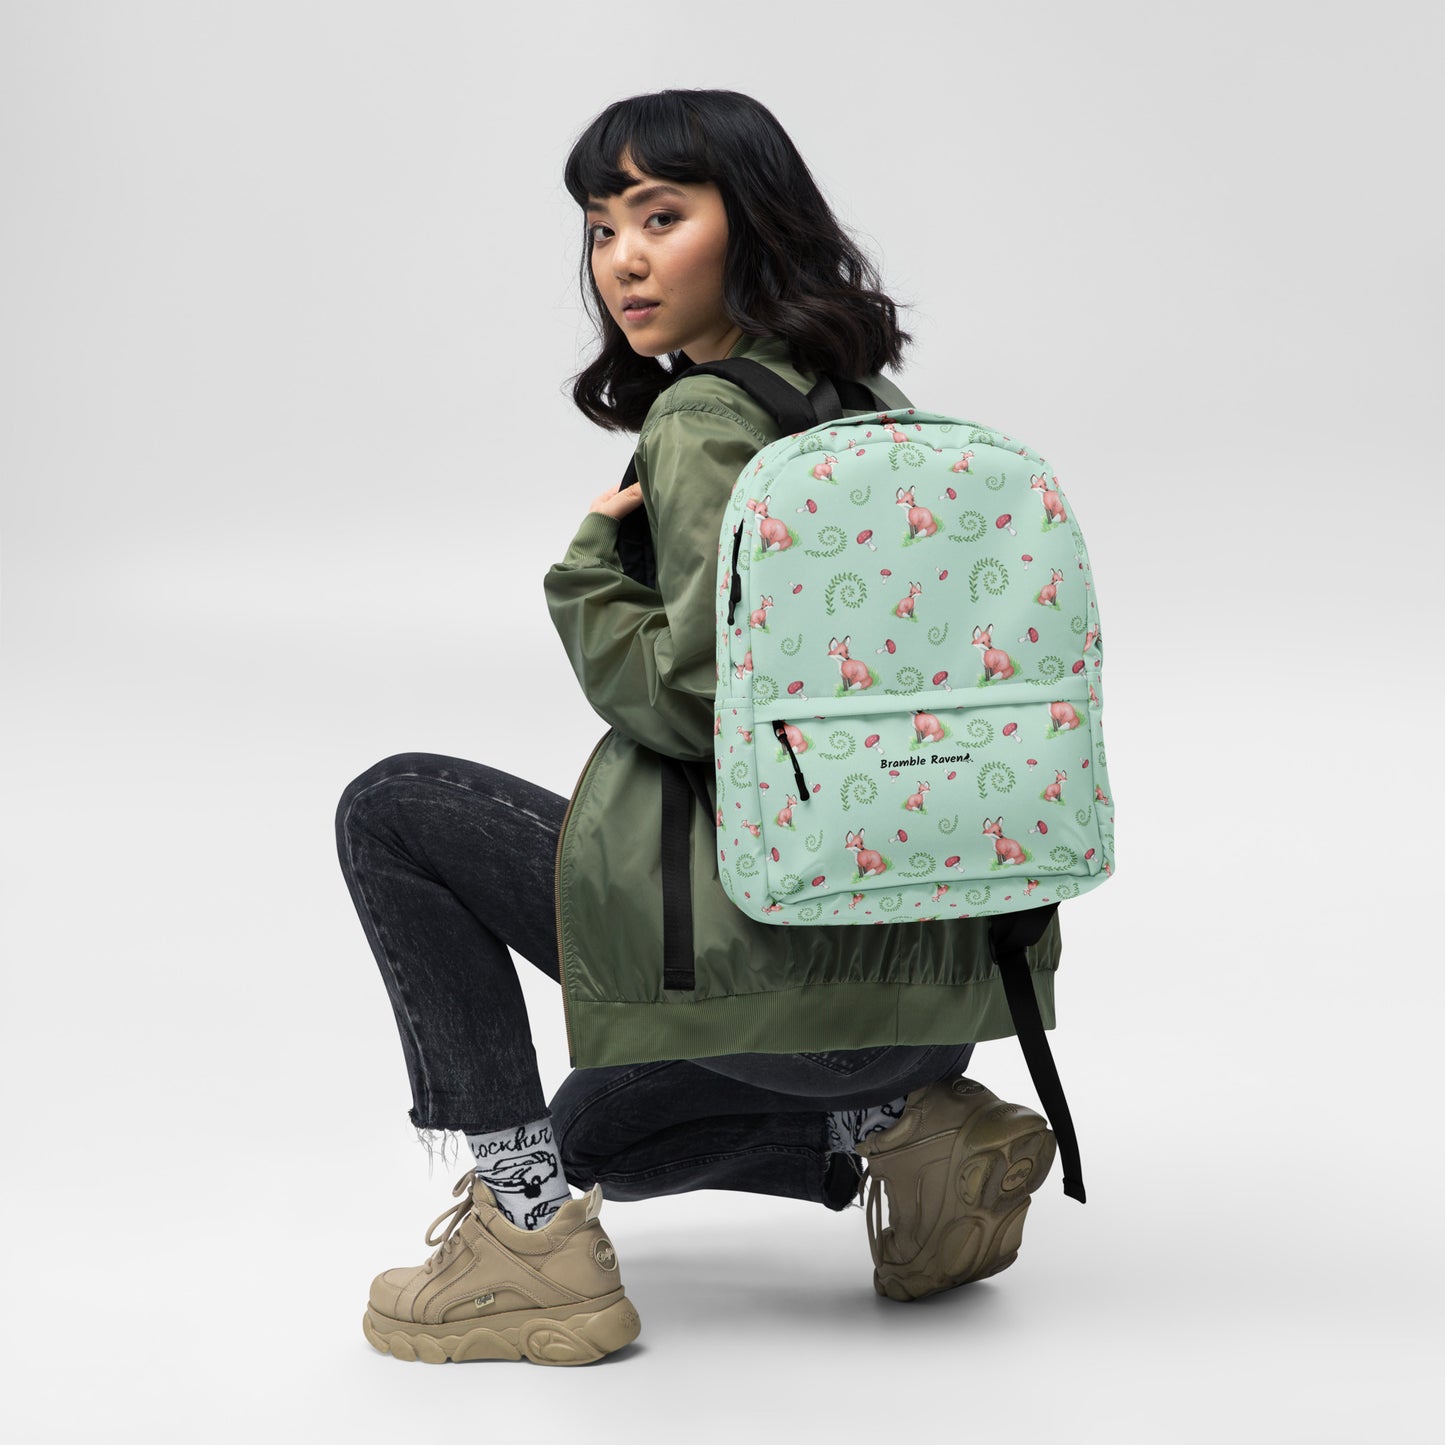 Forest fox backpack. Has watercolor foxes, mushrooms and ferns on a light green water-resistant polyester fabric. Includes an inner pocket that can hold a 15 inch laptop. Has a hidden pocket with zipper on the back, and ergonomic straps. Shown on female model.